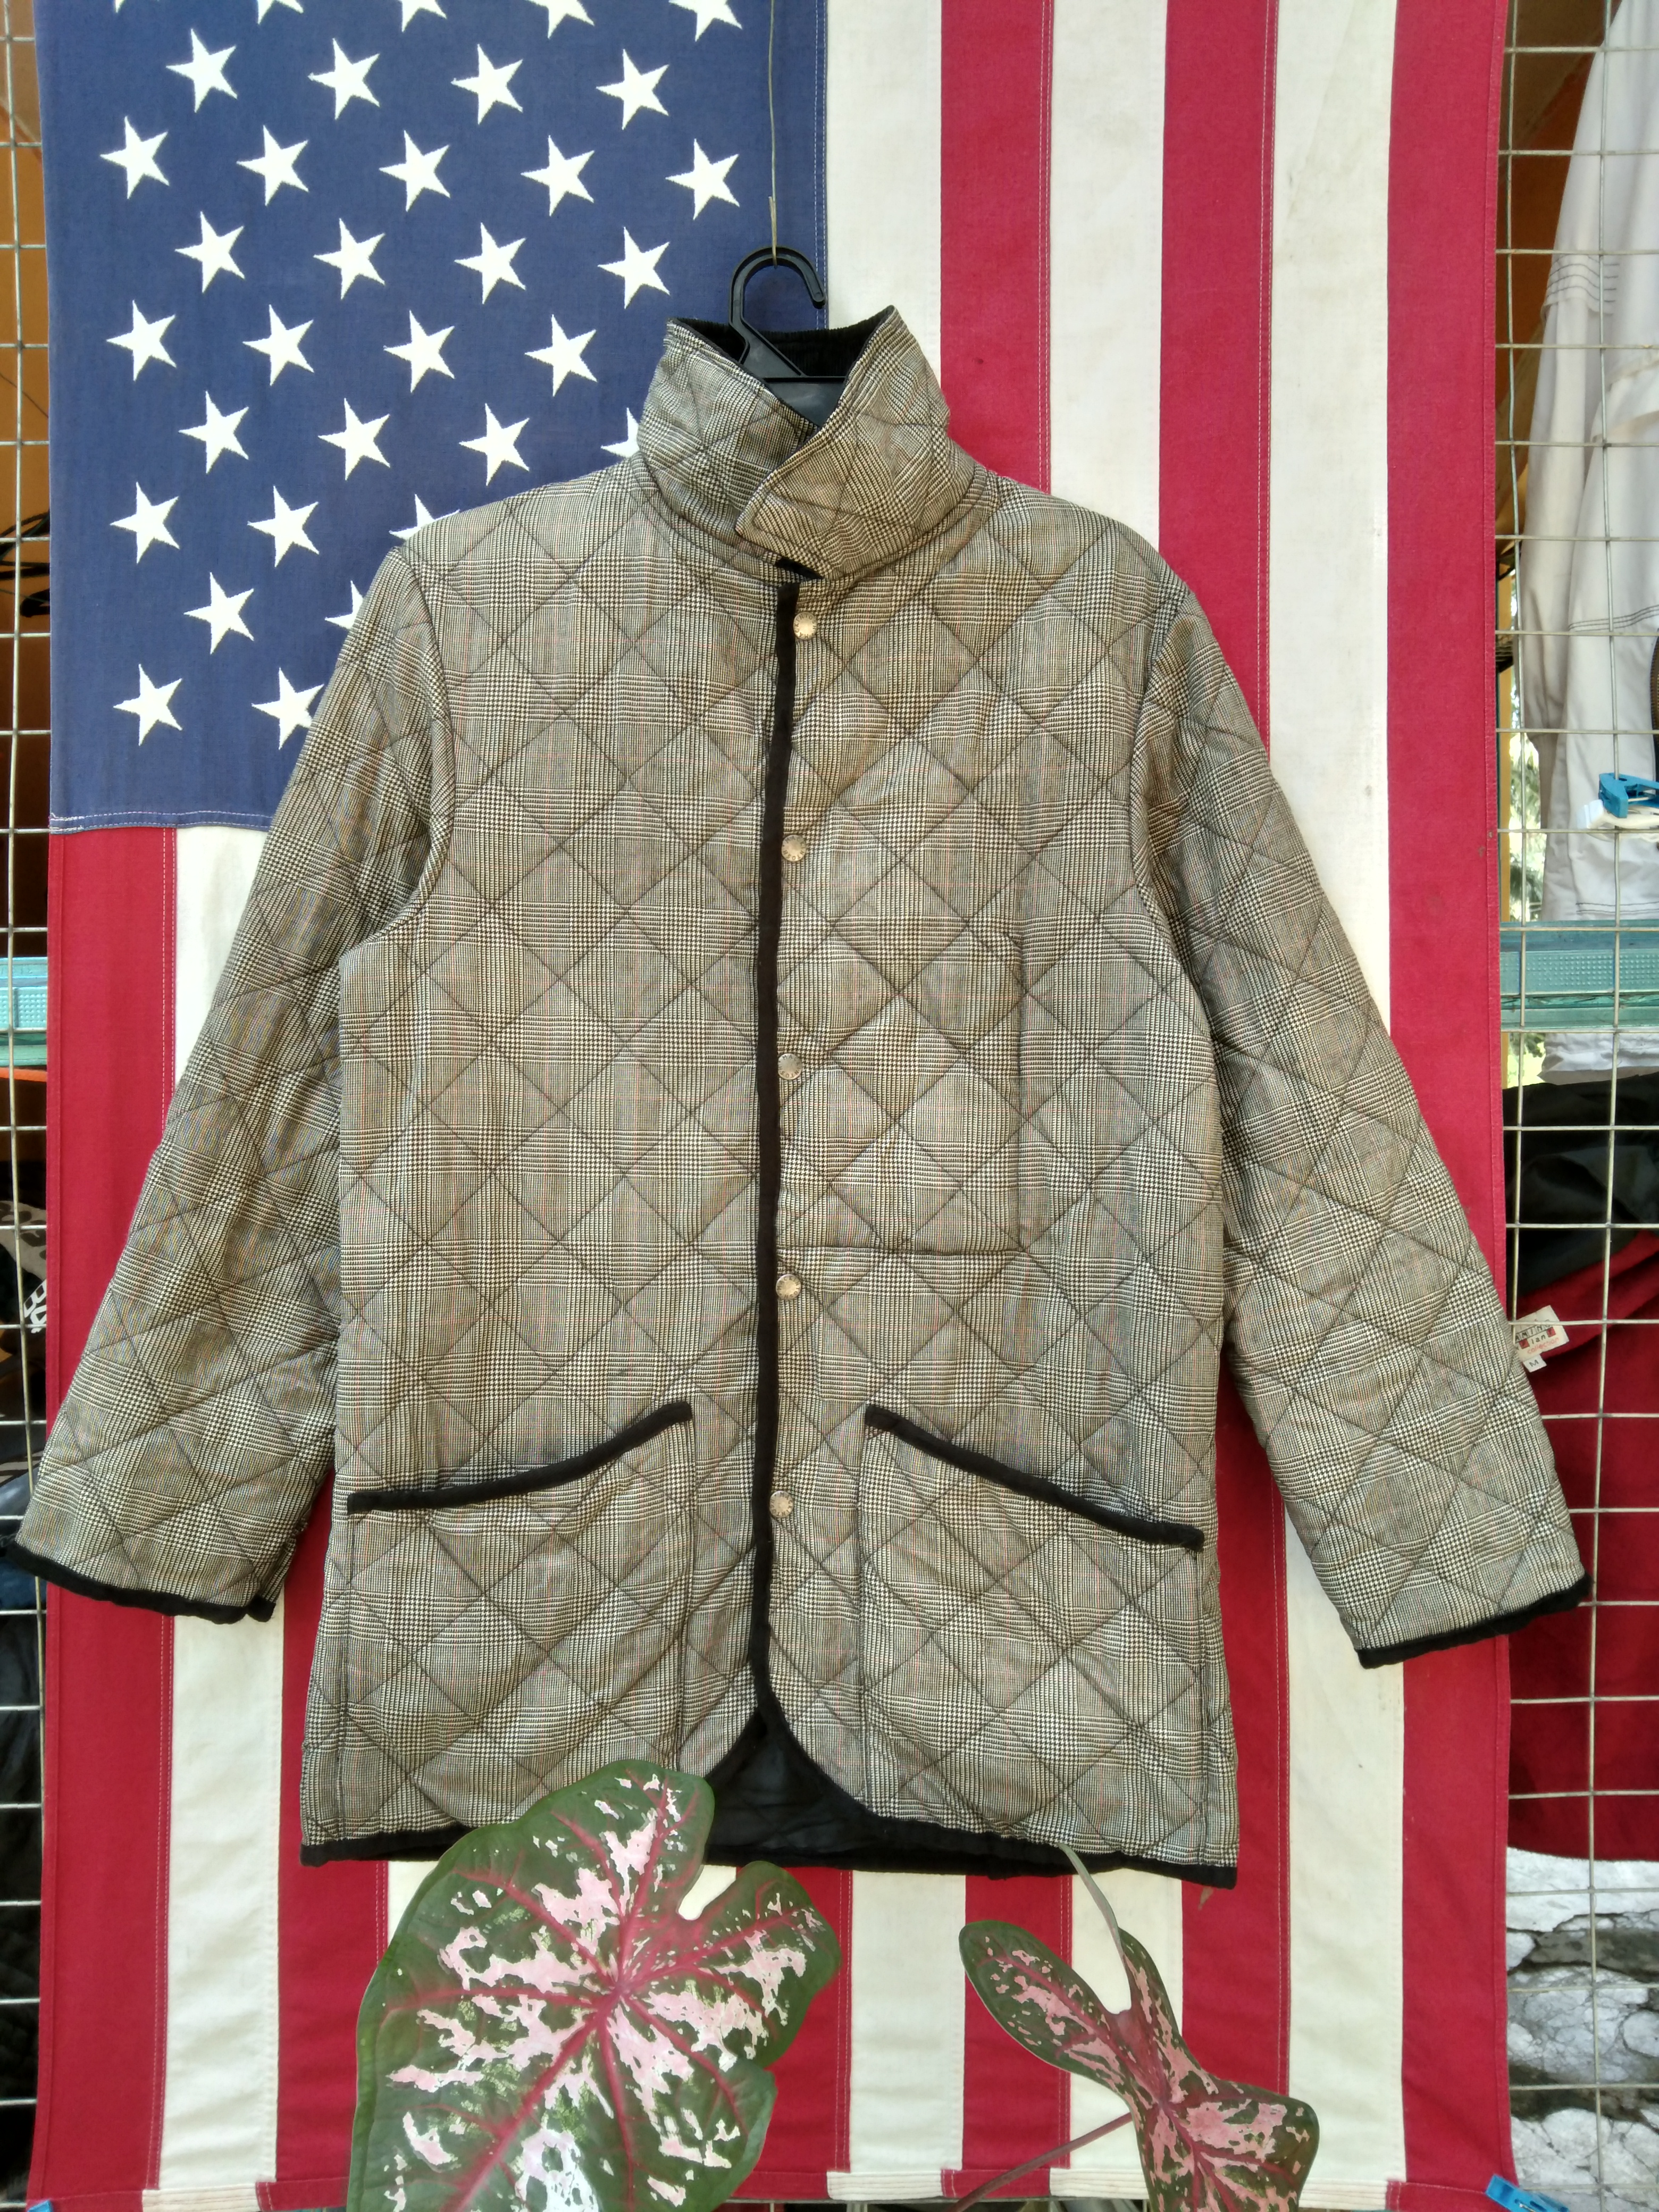 VINTAGE MACKINTOSH x SHIPS QUILTED JACKET - 1